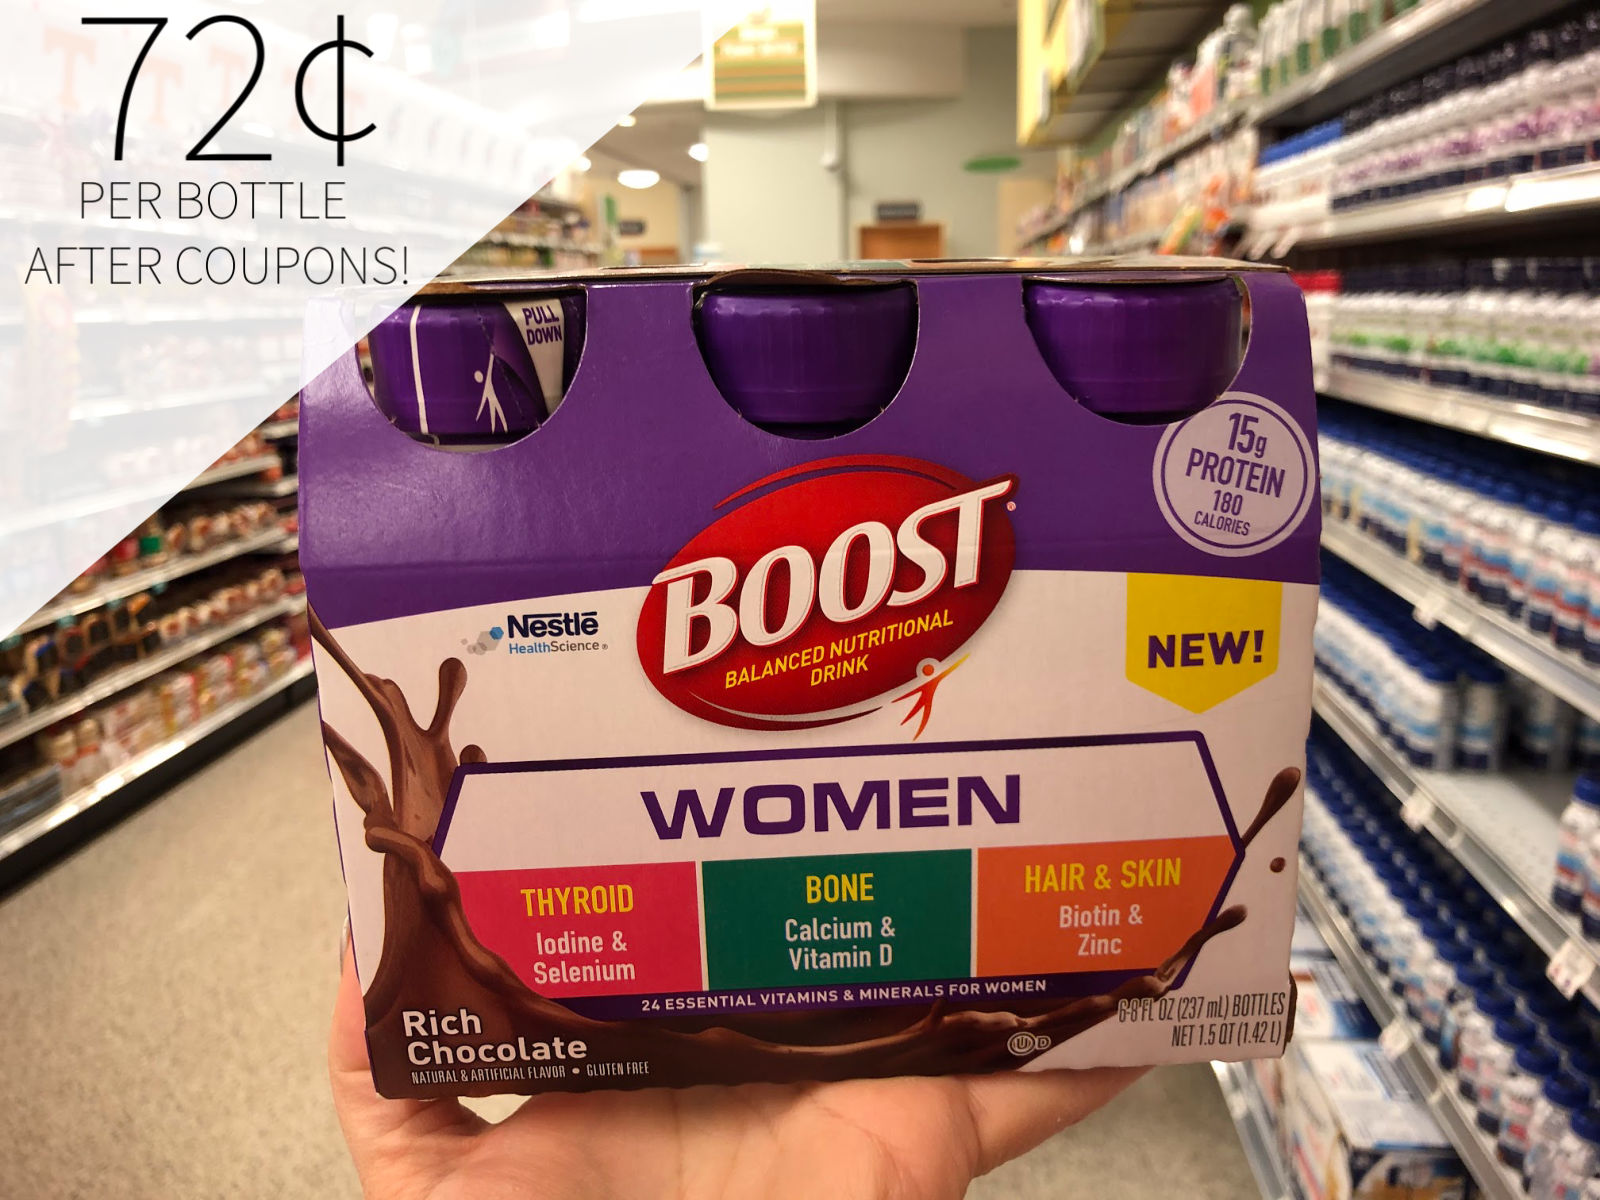 Try NEW BOOST® WOMEN Balanced Nutritional Drinks – Big Savings Available Now At Publix